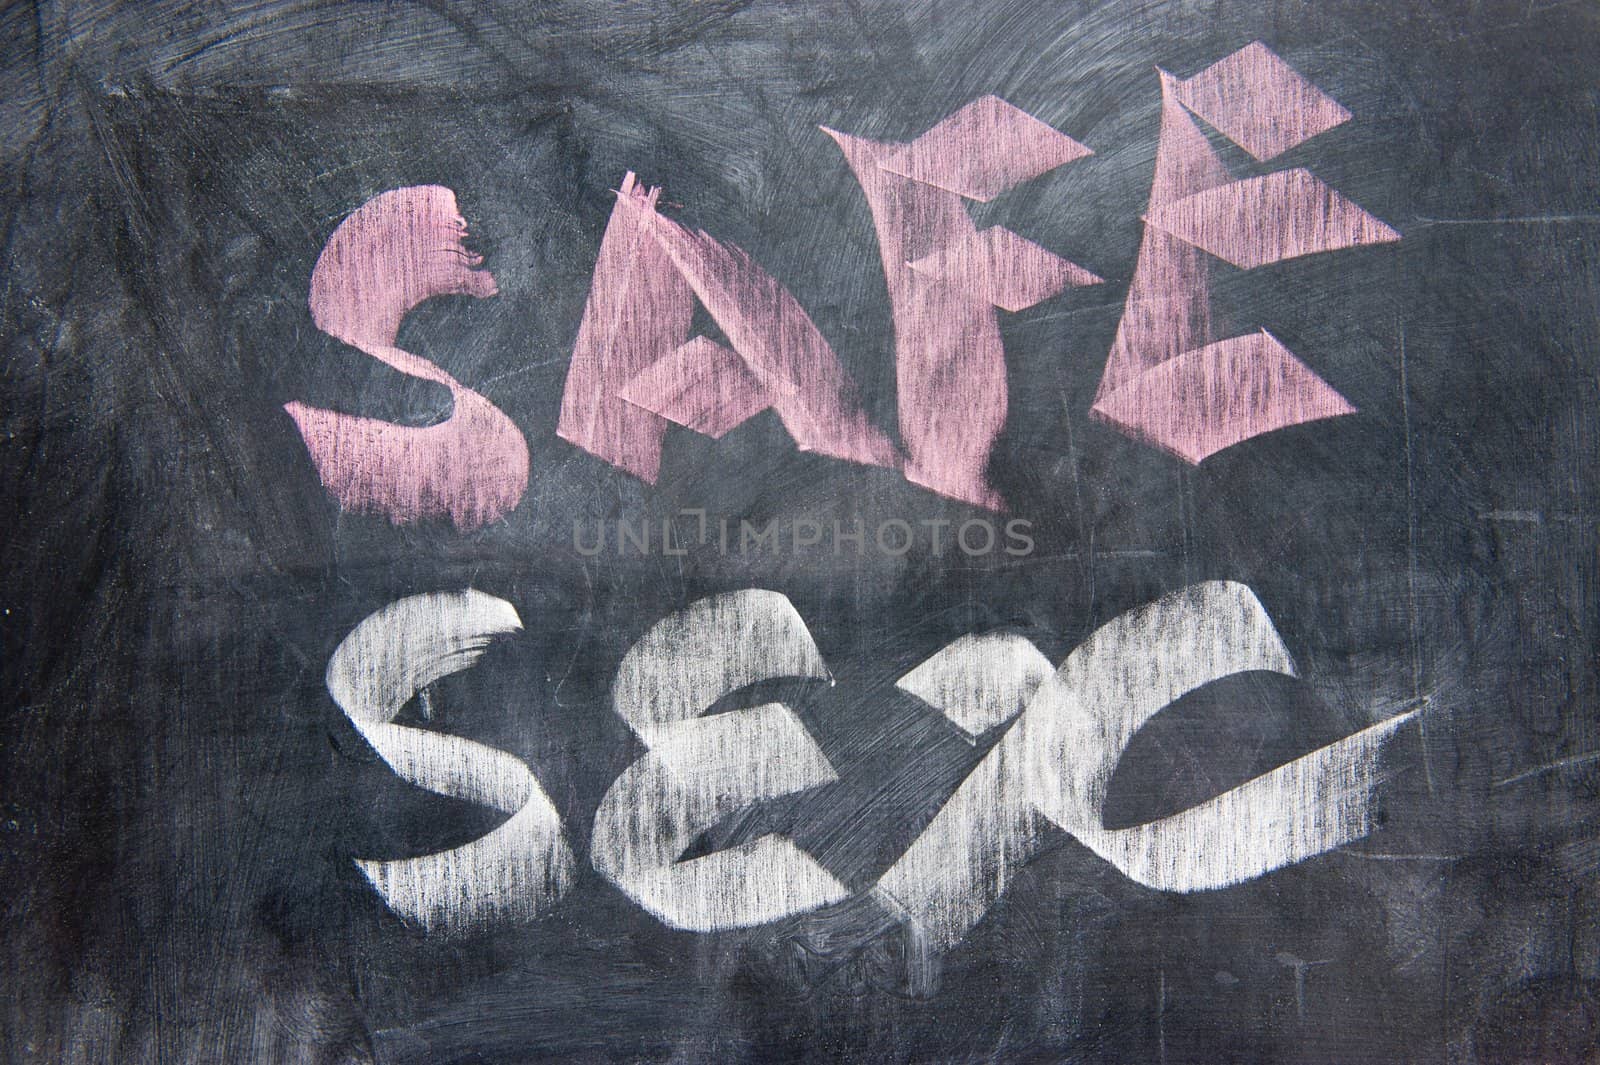 Chalkboard writing - Safe sex by raywoo